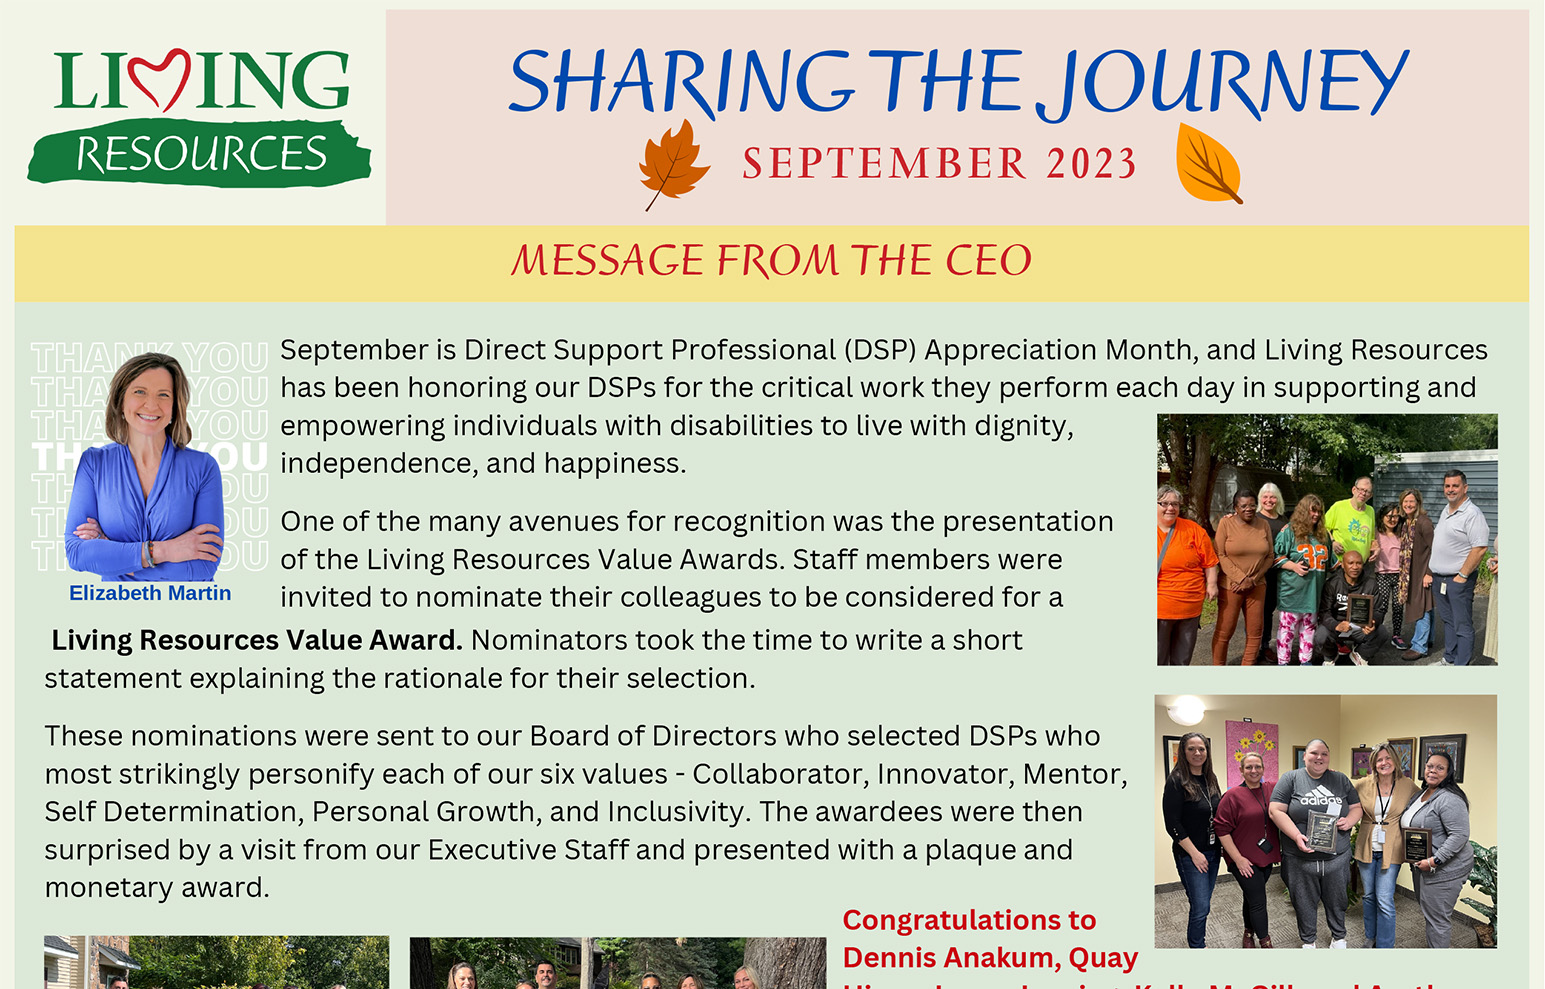 Image shows the front page of the September 2023 Sharing the Journey Newsletter